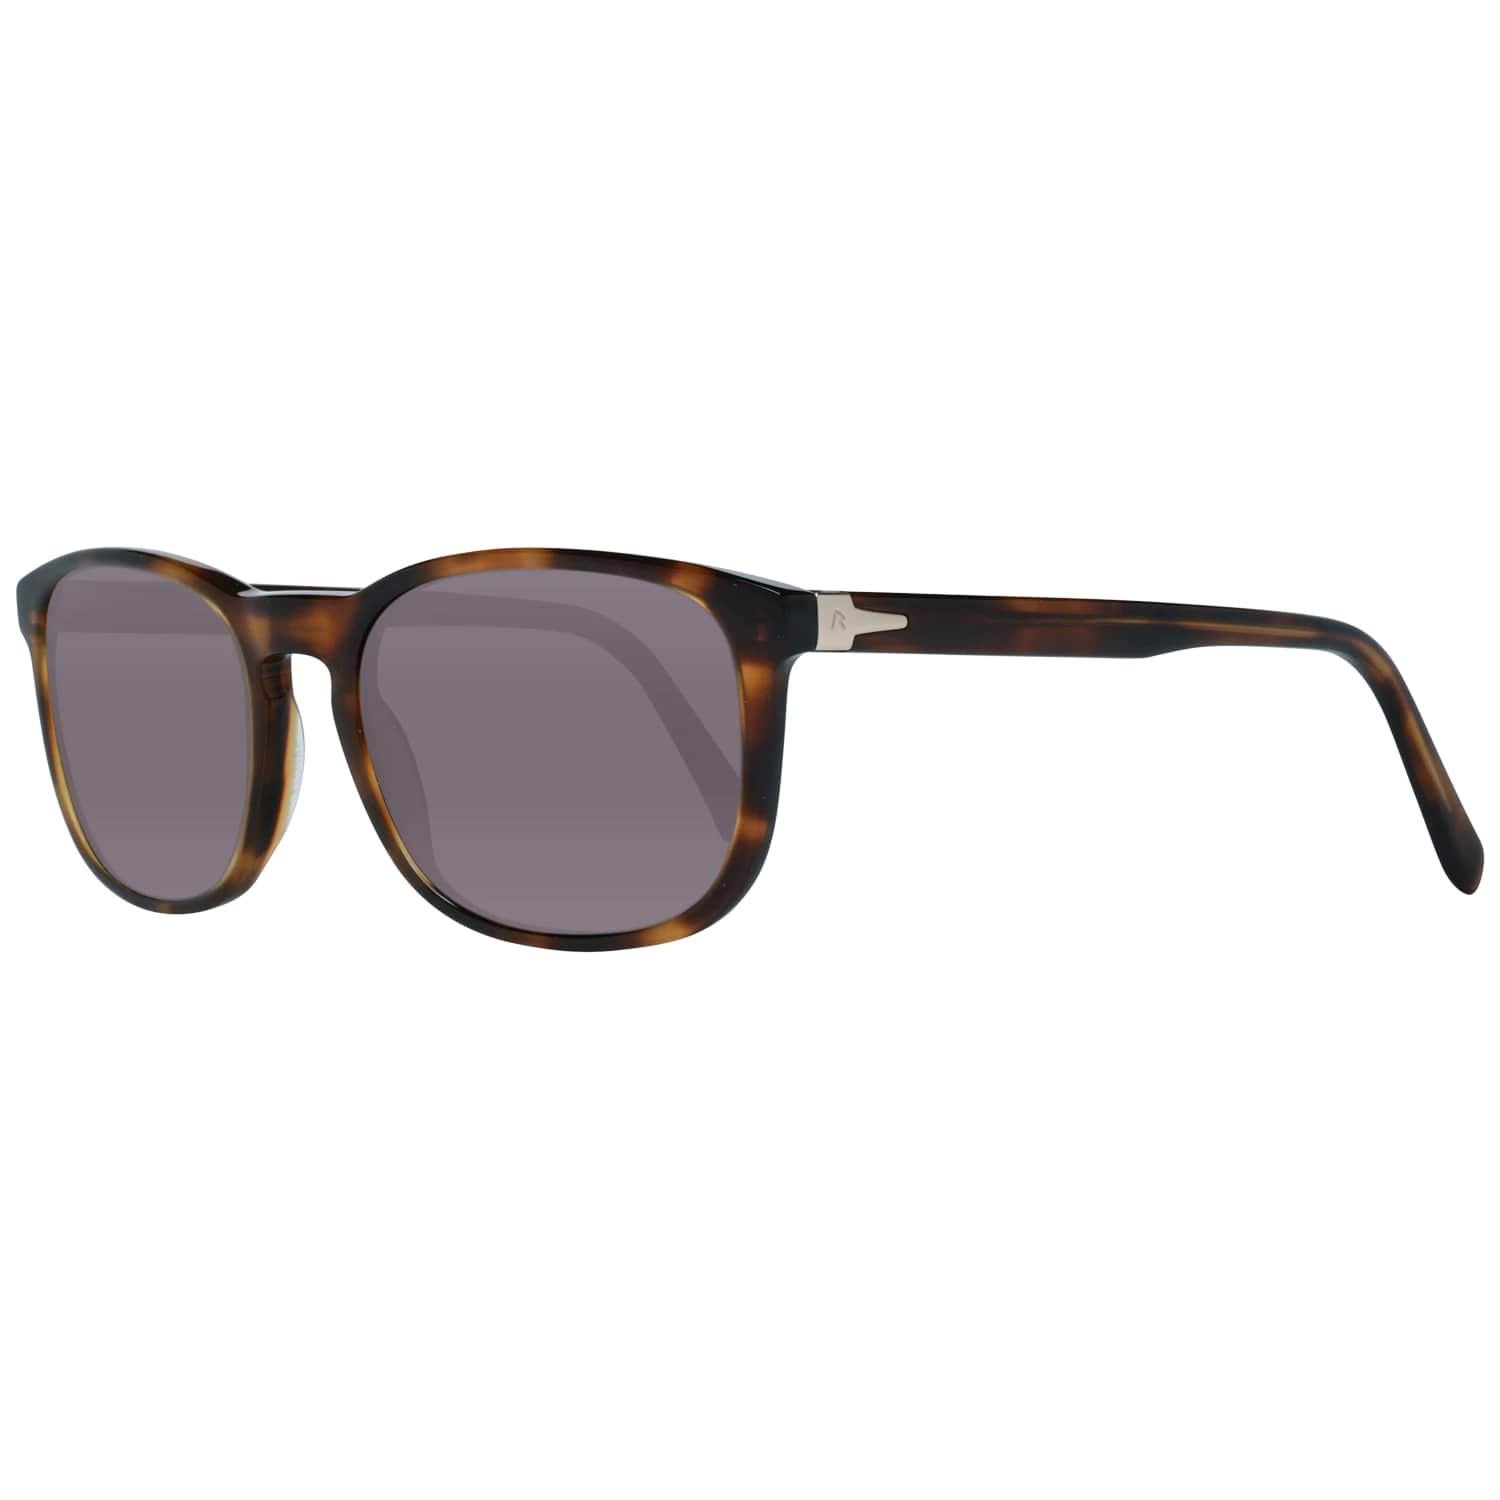 Details
MATERIAL: Acetate
COLOR: Brown
MODEL: R3287-C-5318-140-V500-E42
GENDER: Adult Unisex
COUNTRY OF MANUFACTURE: China
TYPE: Sunglasses
ORIGINAL CASE?: Yes
STYLE: Oval
OCCASION: Casual
FEATURES: Lightweight
LENS COLOR: Brown
LENS TECHNOLOGY: No